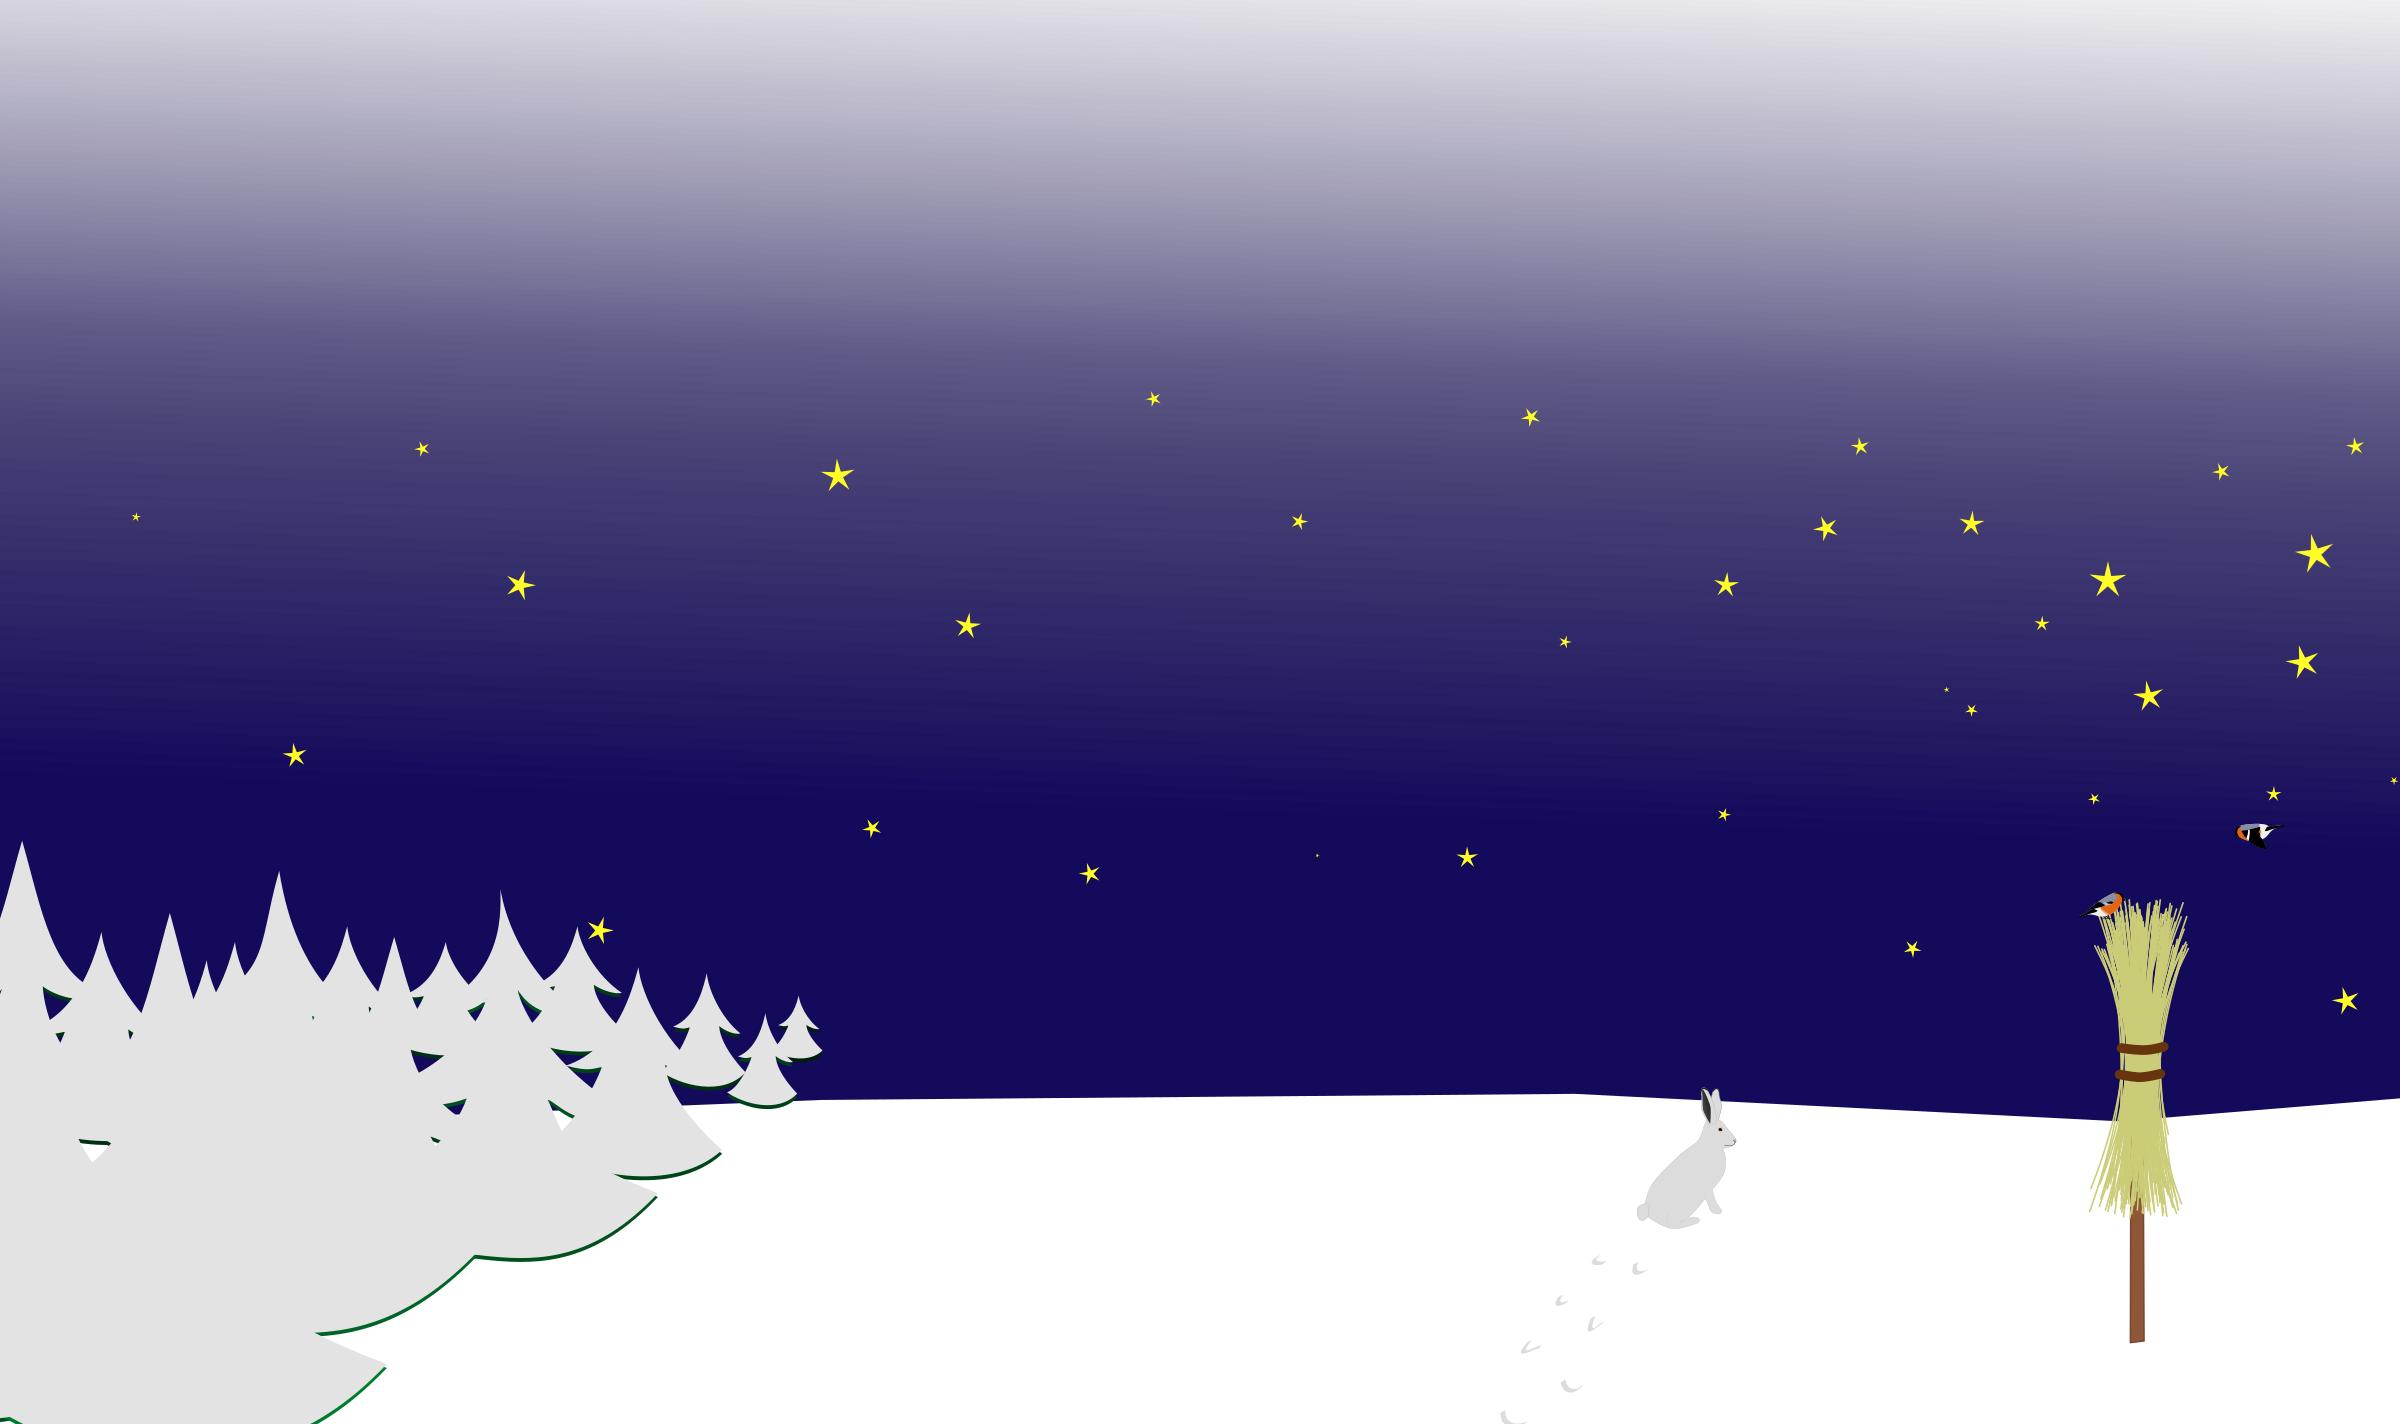 Winter night scene PNG icons